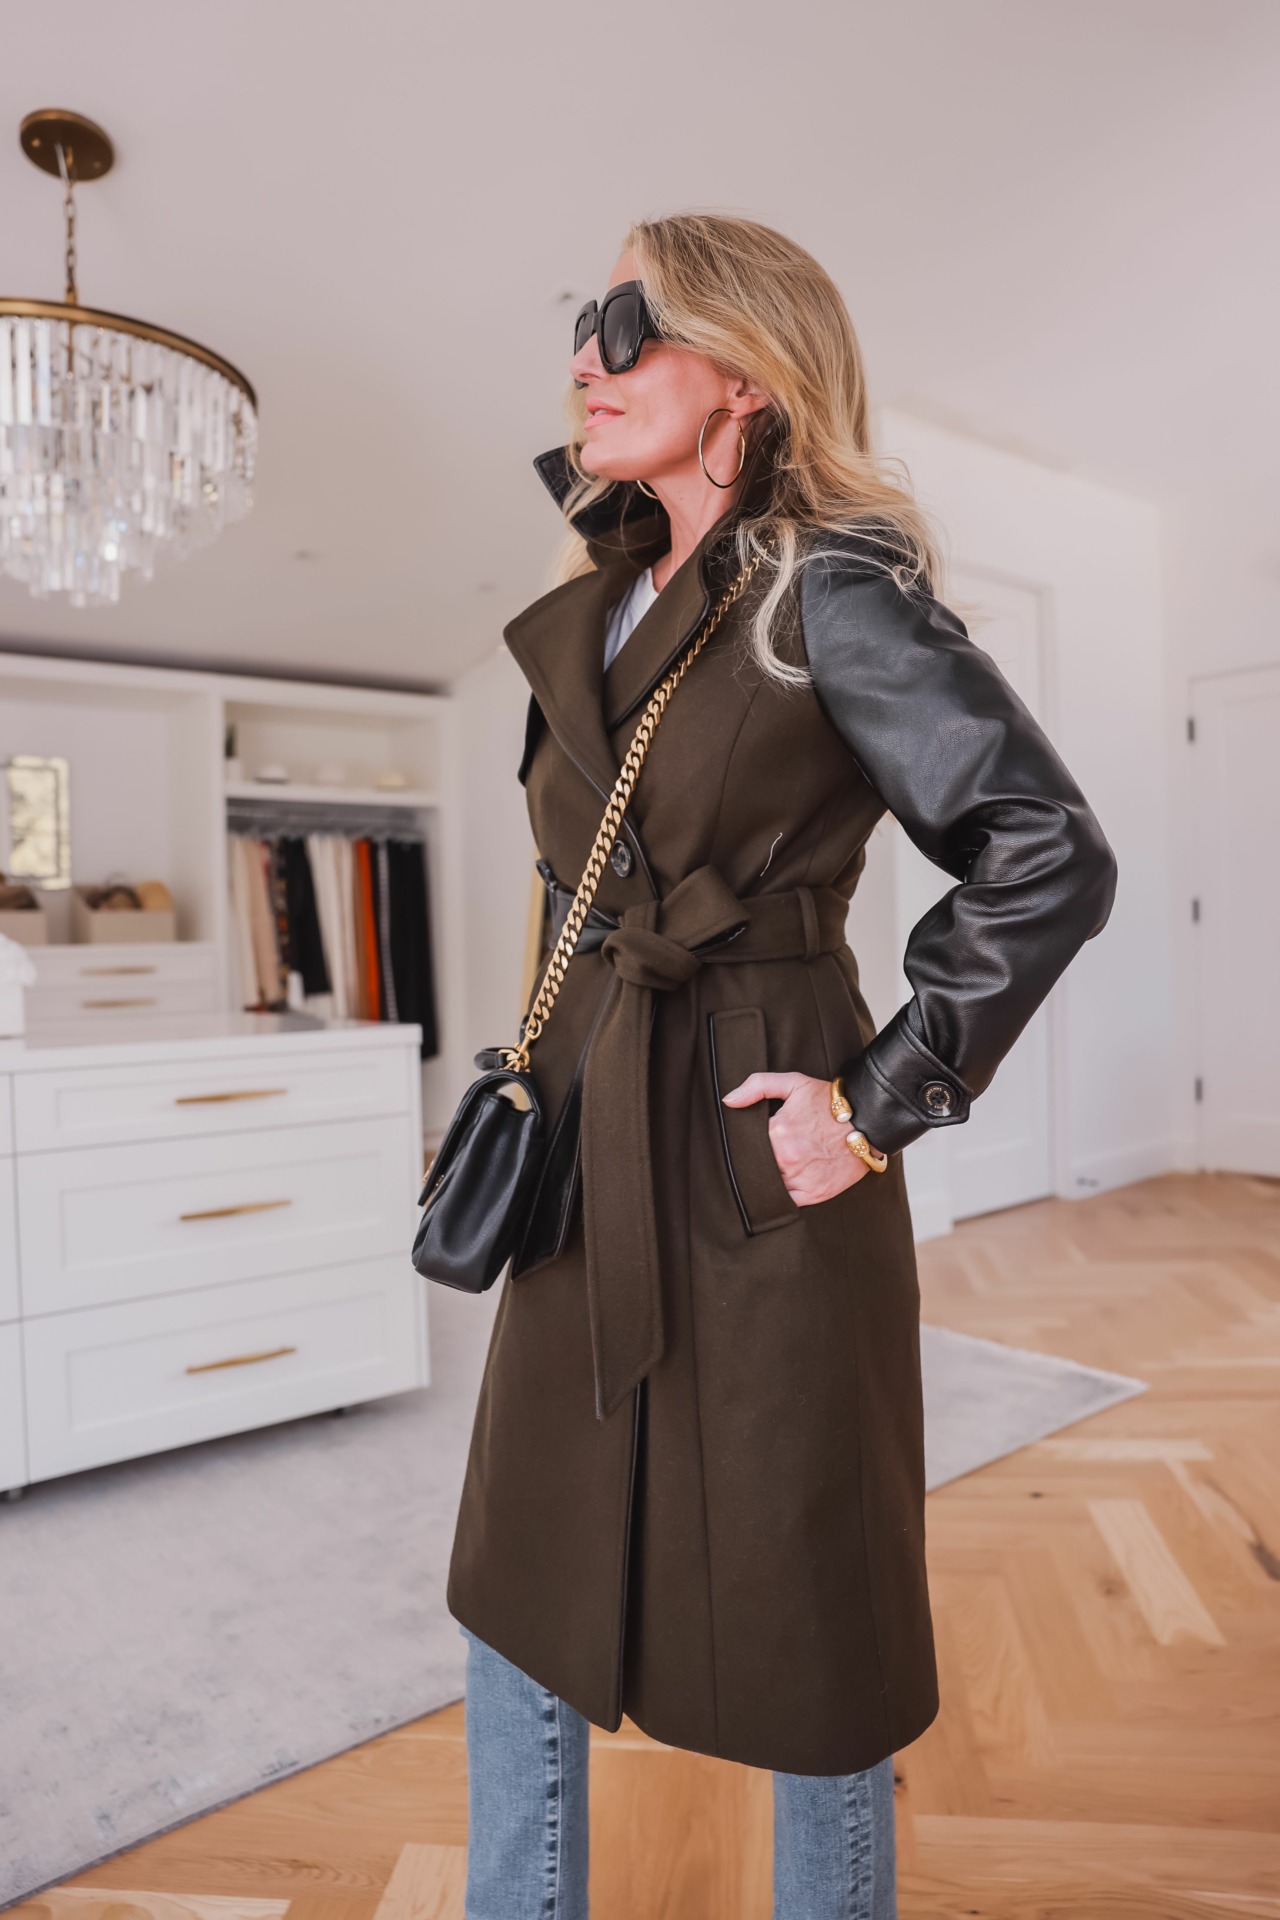 Fall jackets, fall outfits, best jackets for fall, don’t look frumpy in fall jackets, 3rd layer for fall, how to complete an outfit, leather blazers, black blazers, trench coat, puffer jacket, what to wear with jeans and a t-shirt, erin Busbee, fashion blogger over 40, telluride, CO, Sam Edleman mixed-media trench